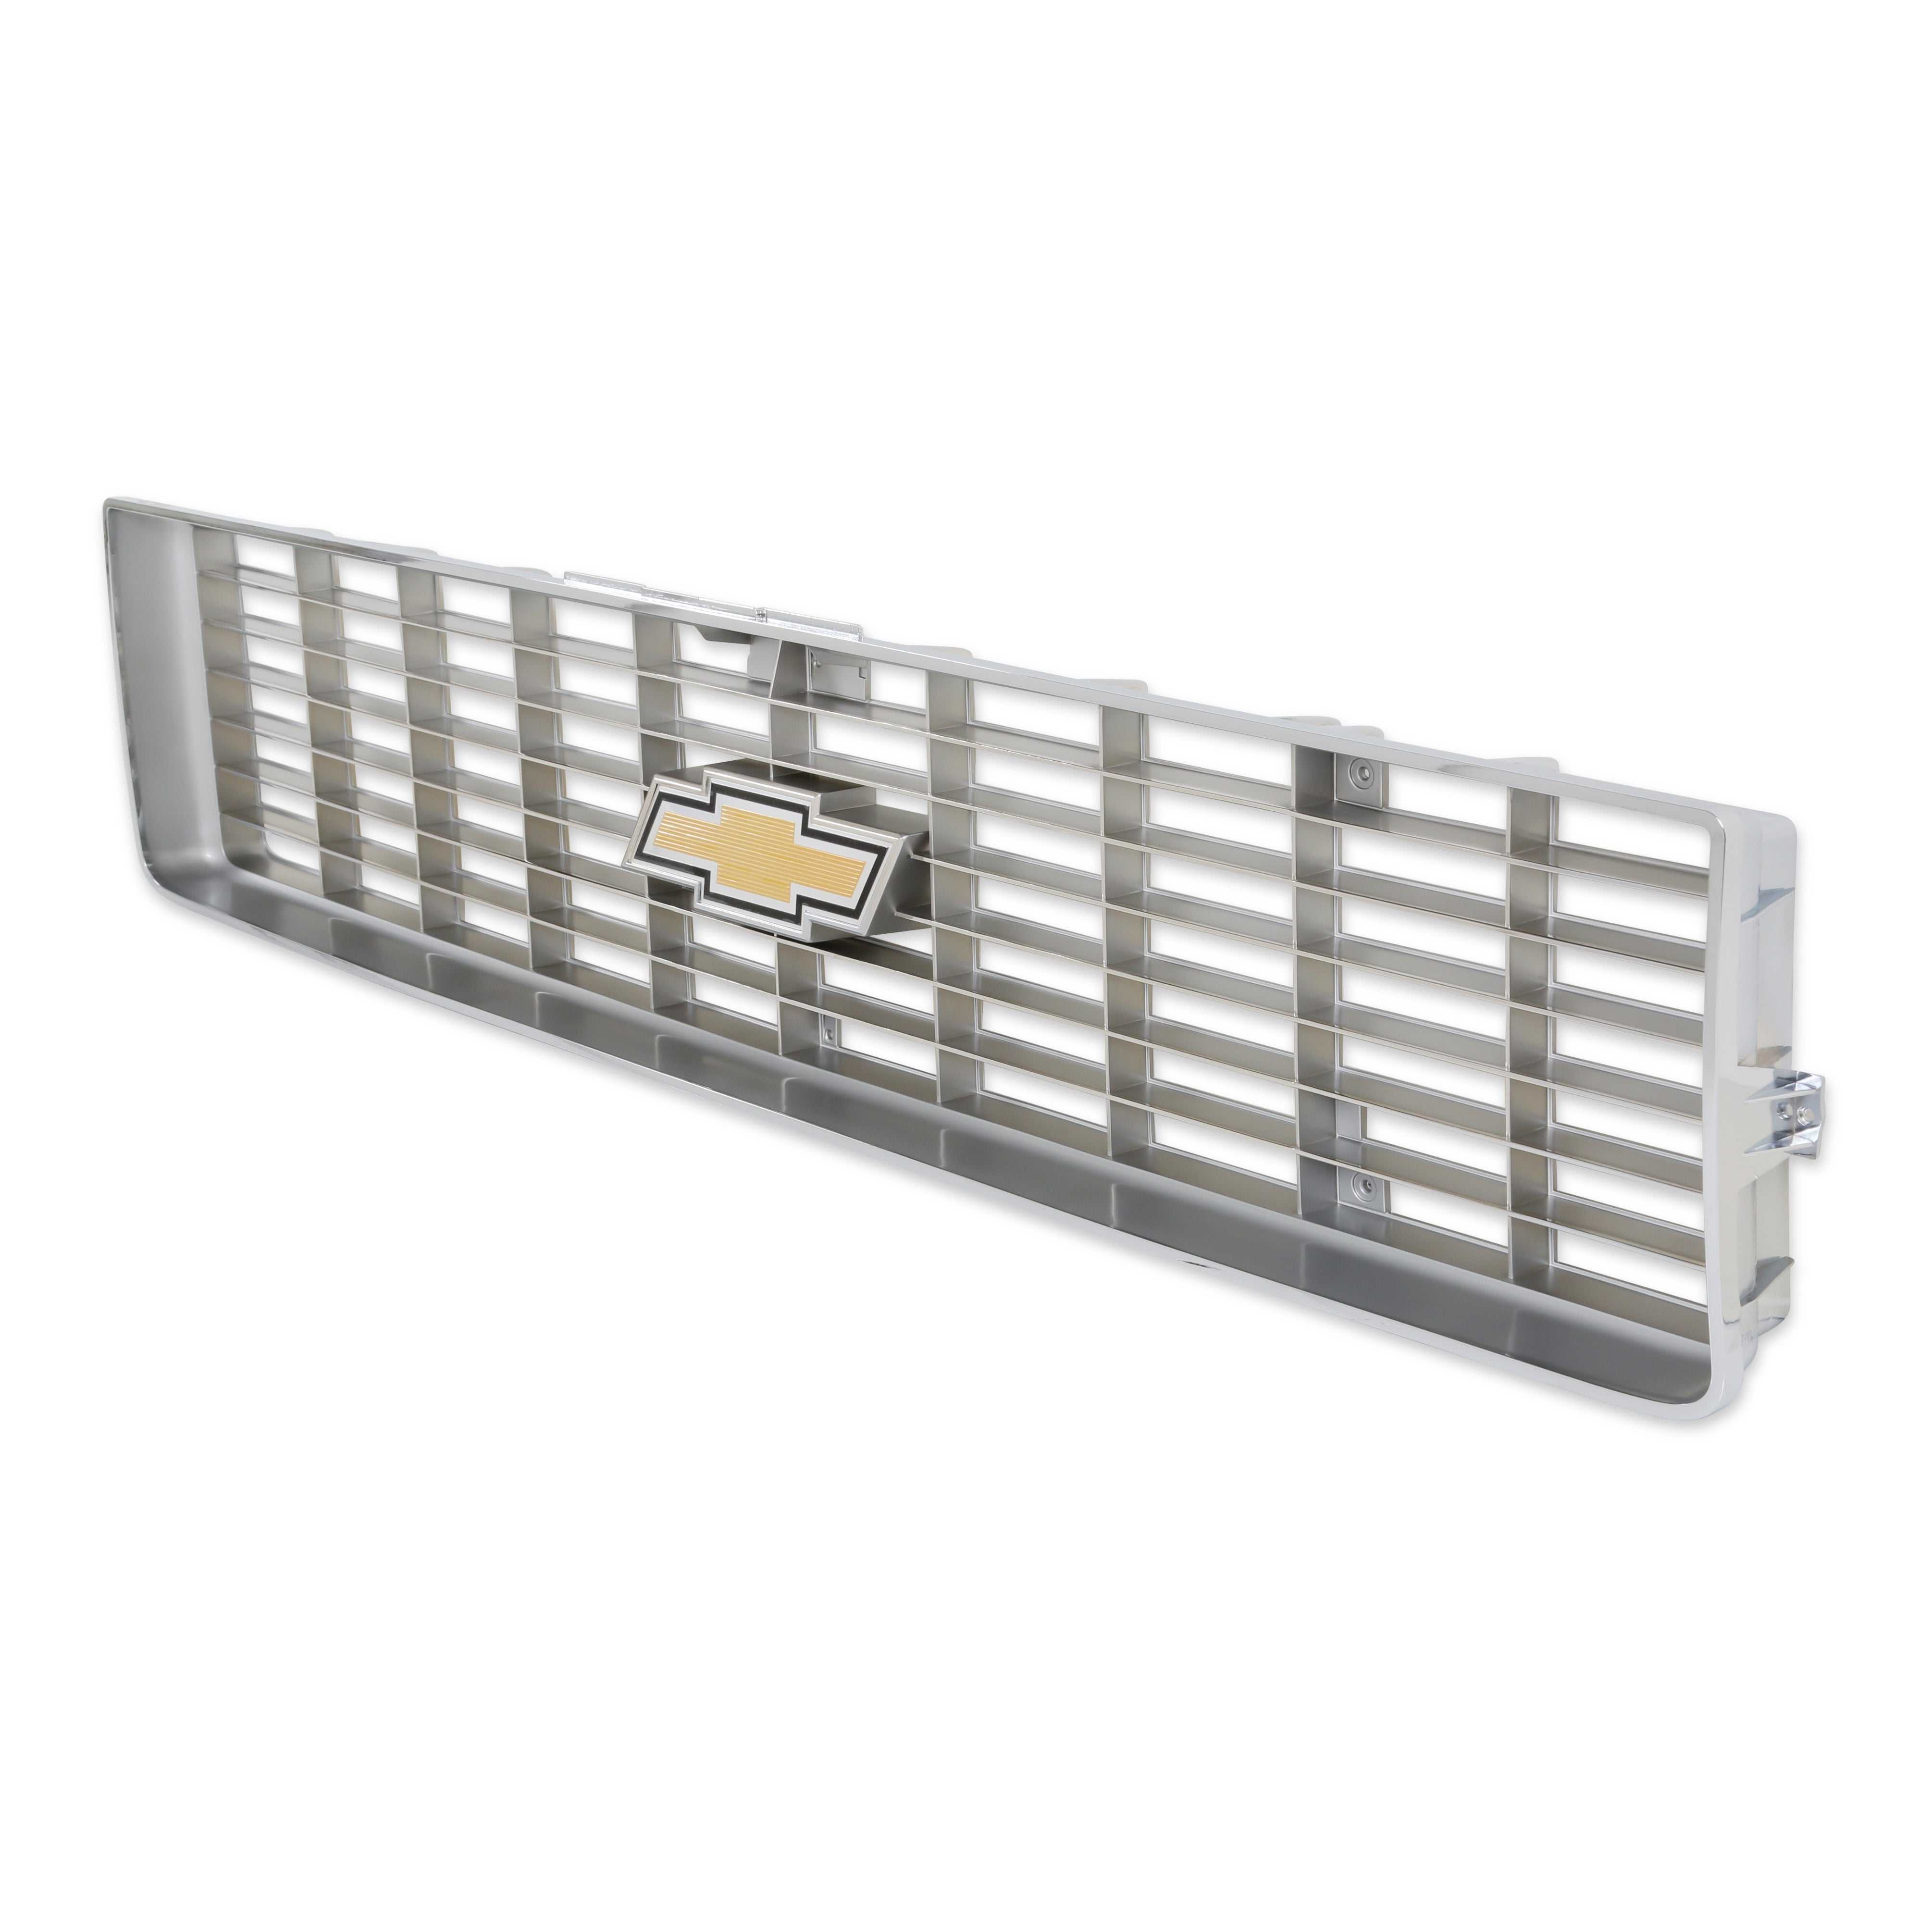 BROTHERS C/K Chevy Grille - w/ Bowtie - Chrome pn 04-168